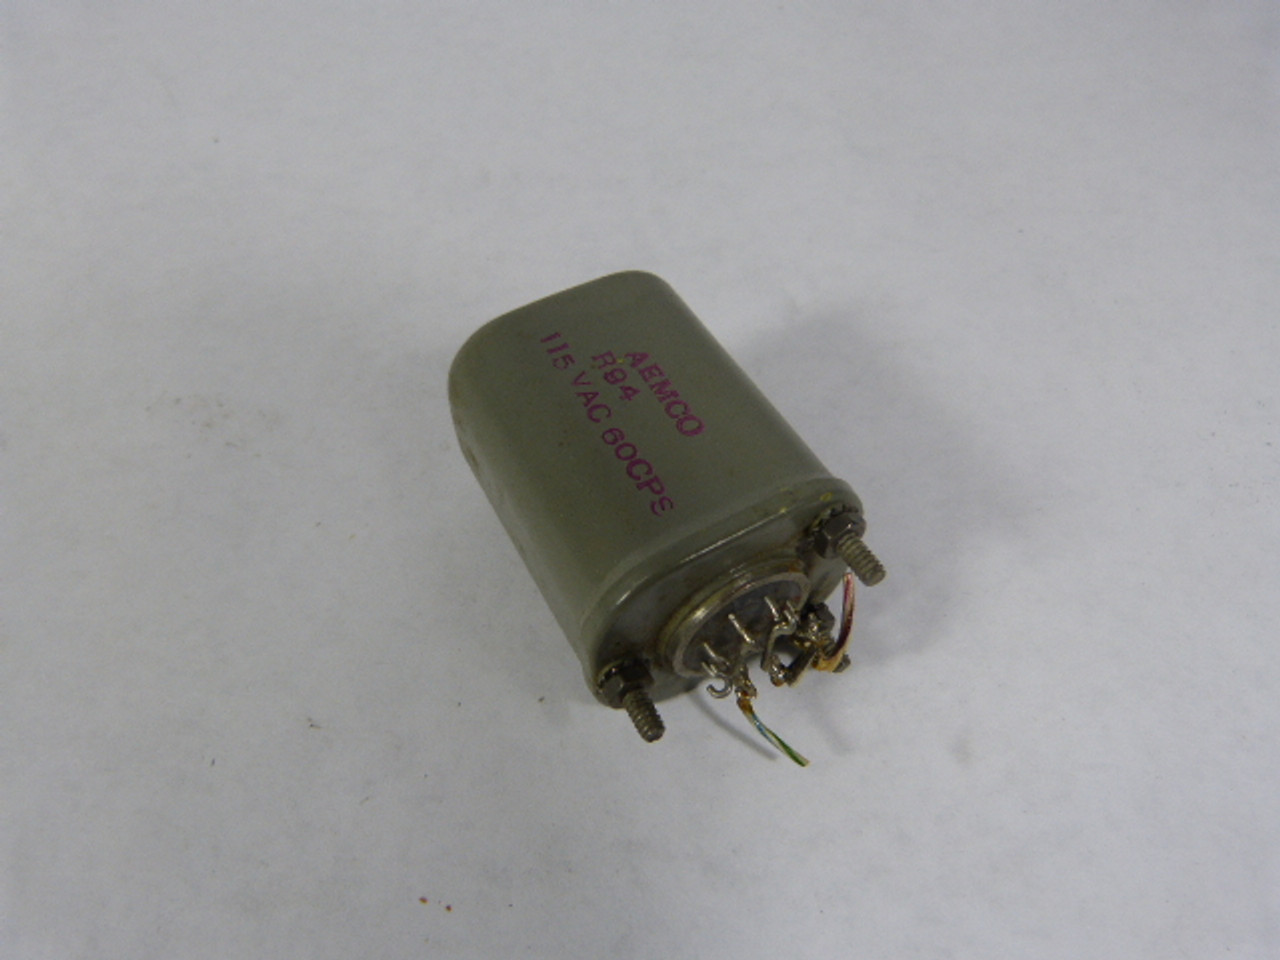 Aemco R94/974-0474-00 Relay 115Vac 60Cps USED